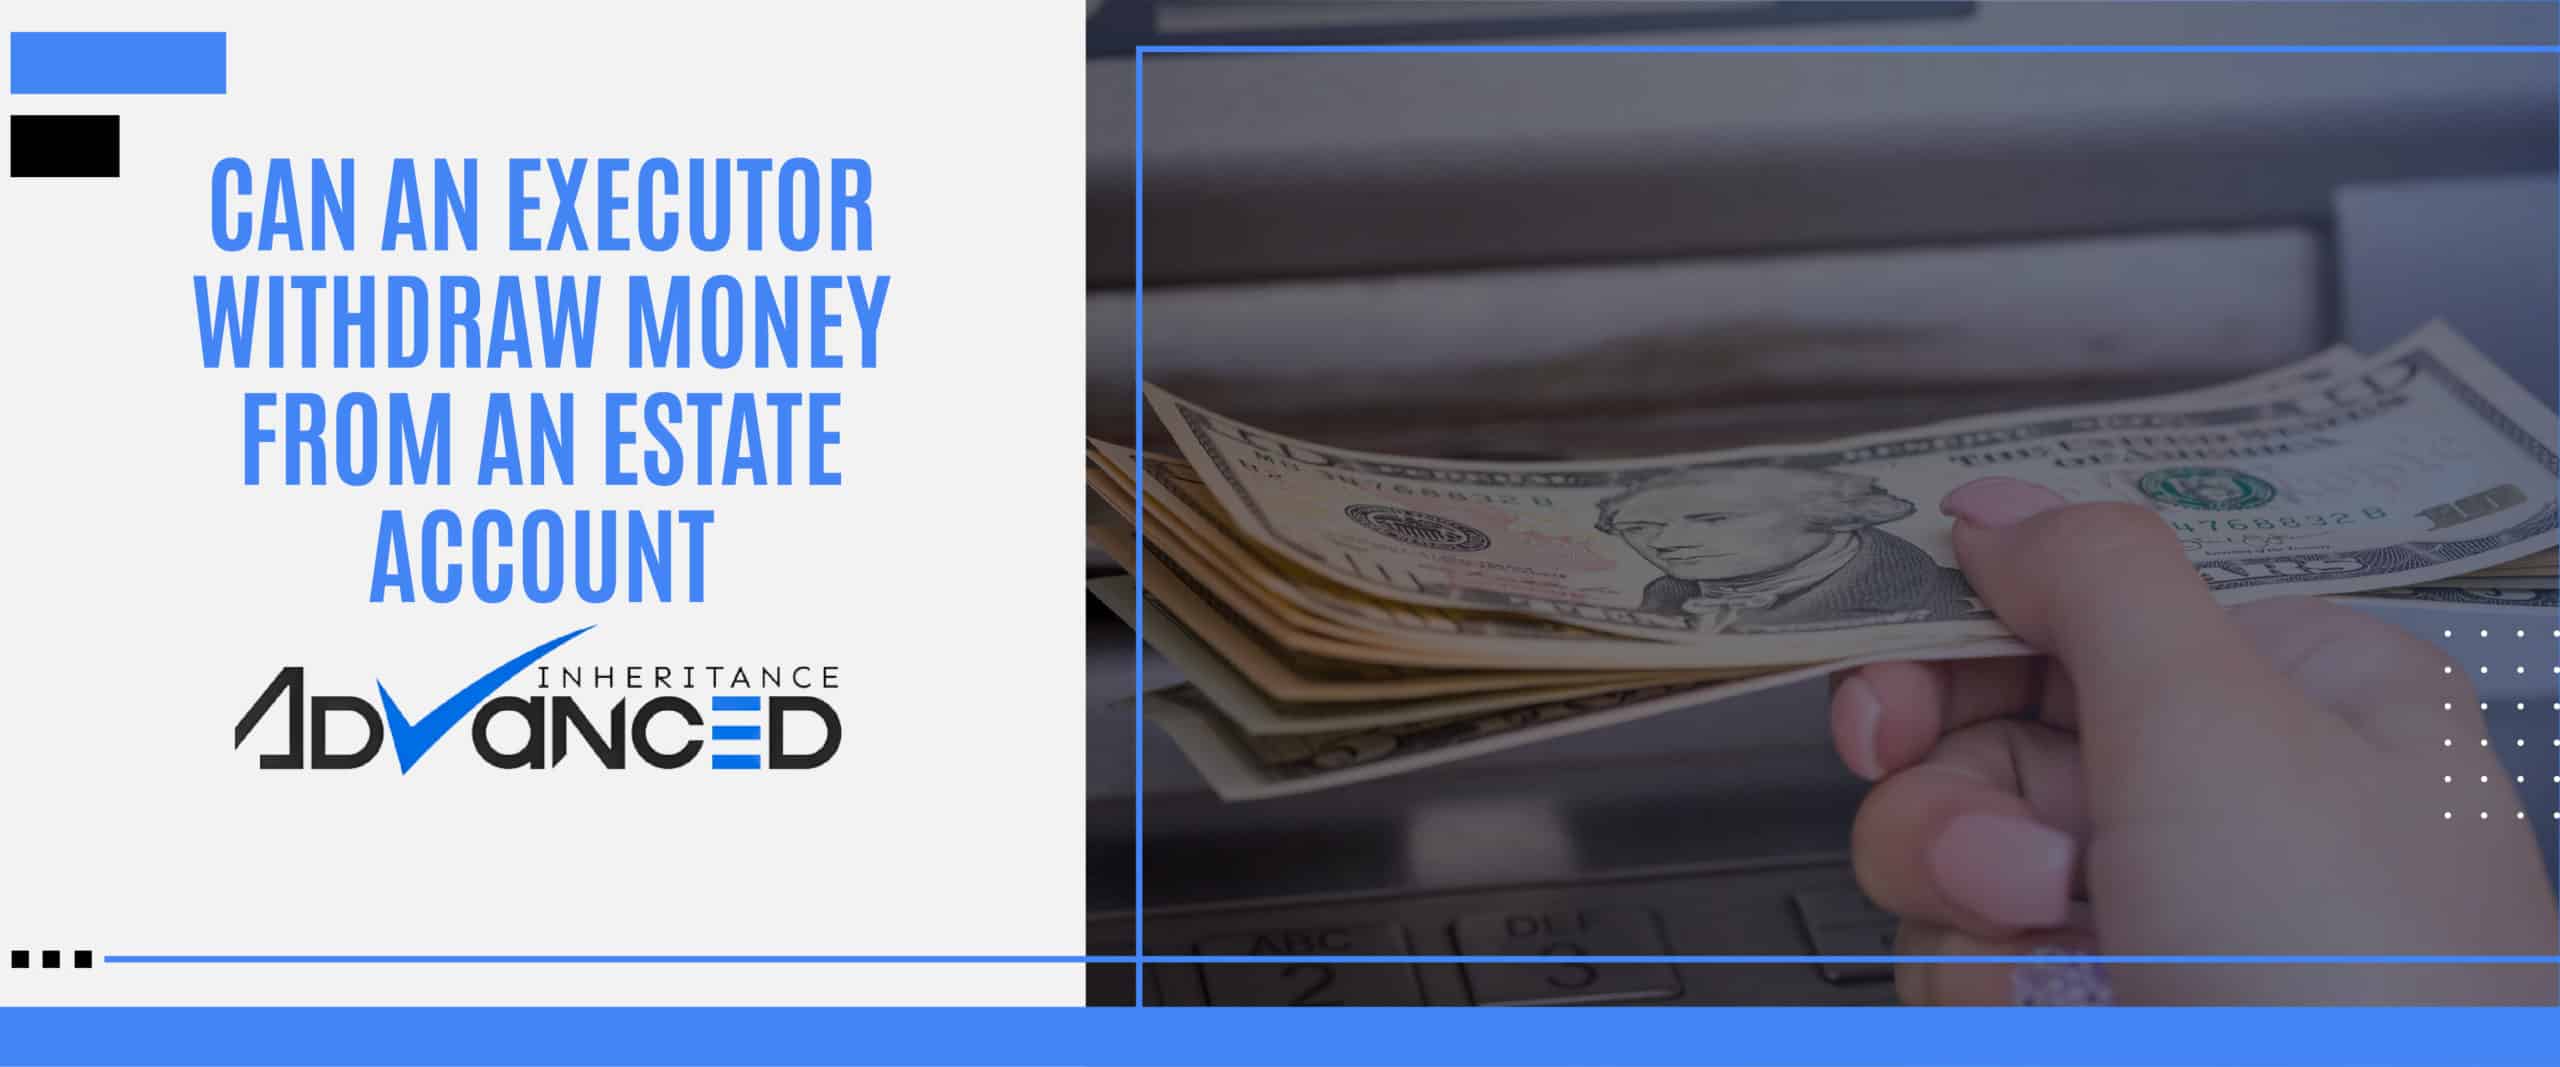 Can An Executor Withdraw Money From An Estate Account